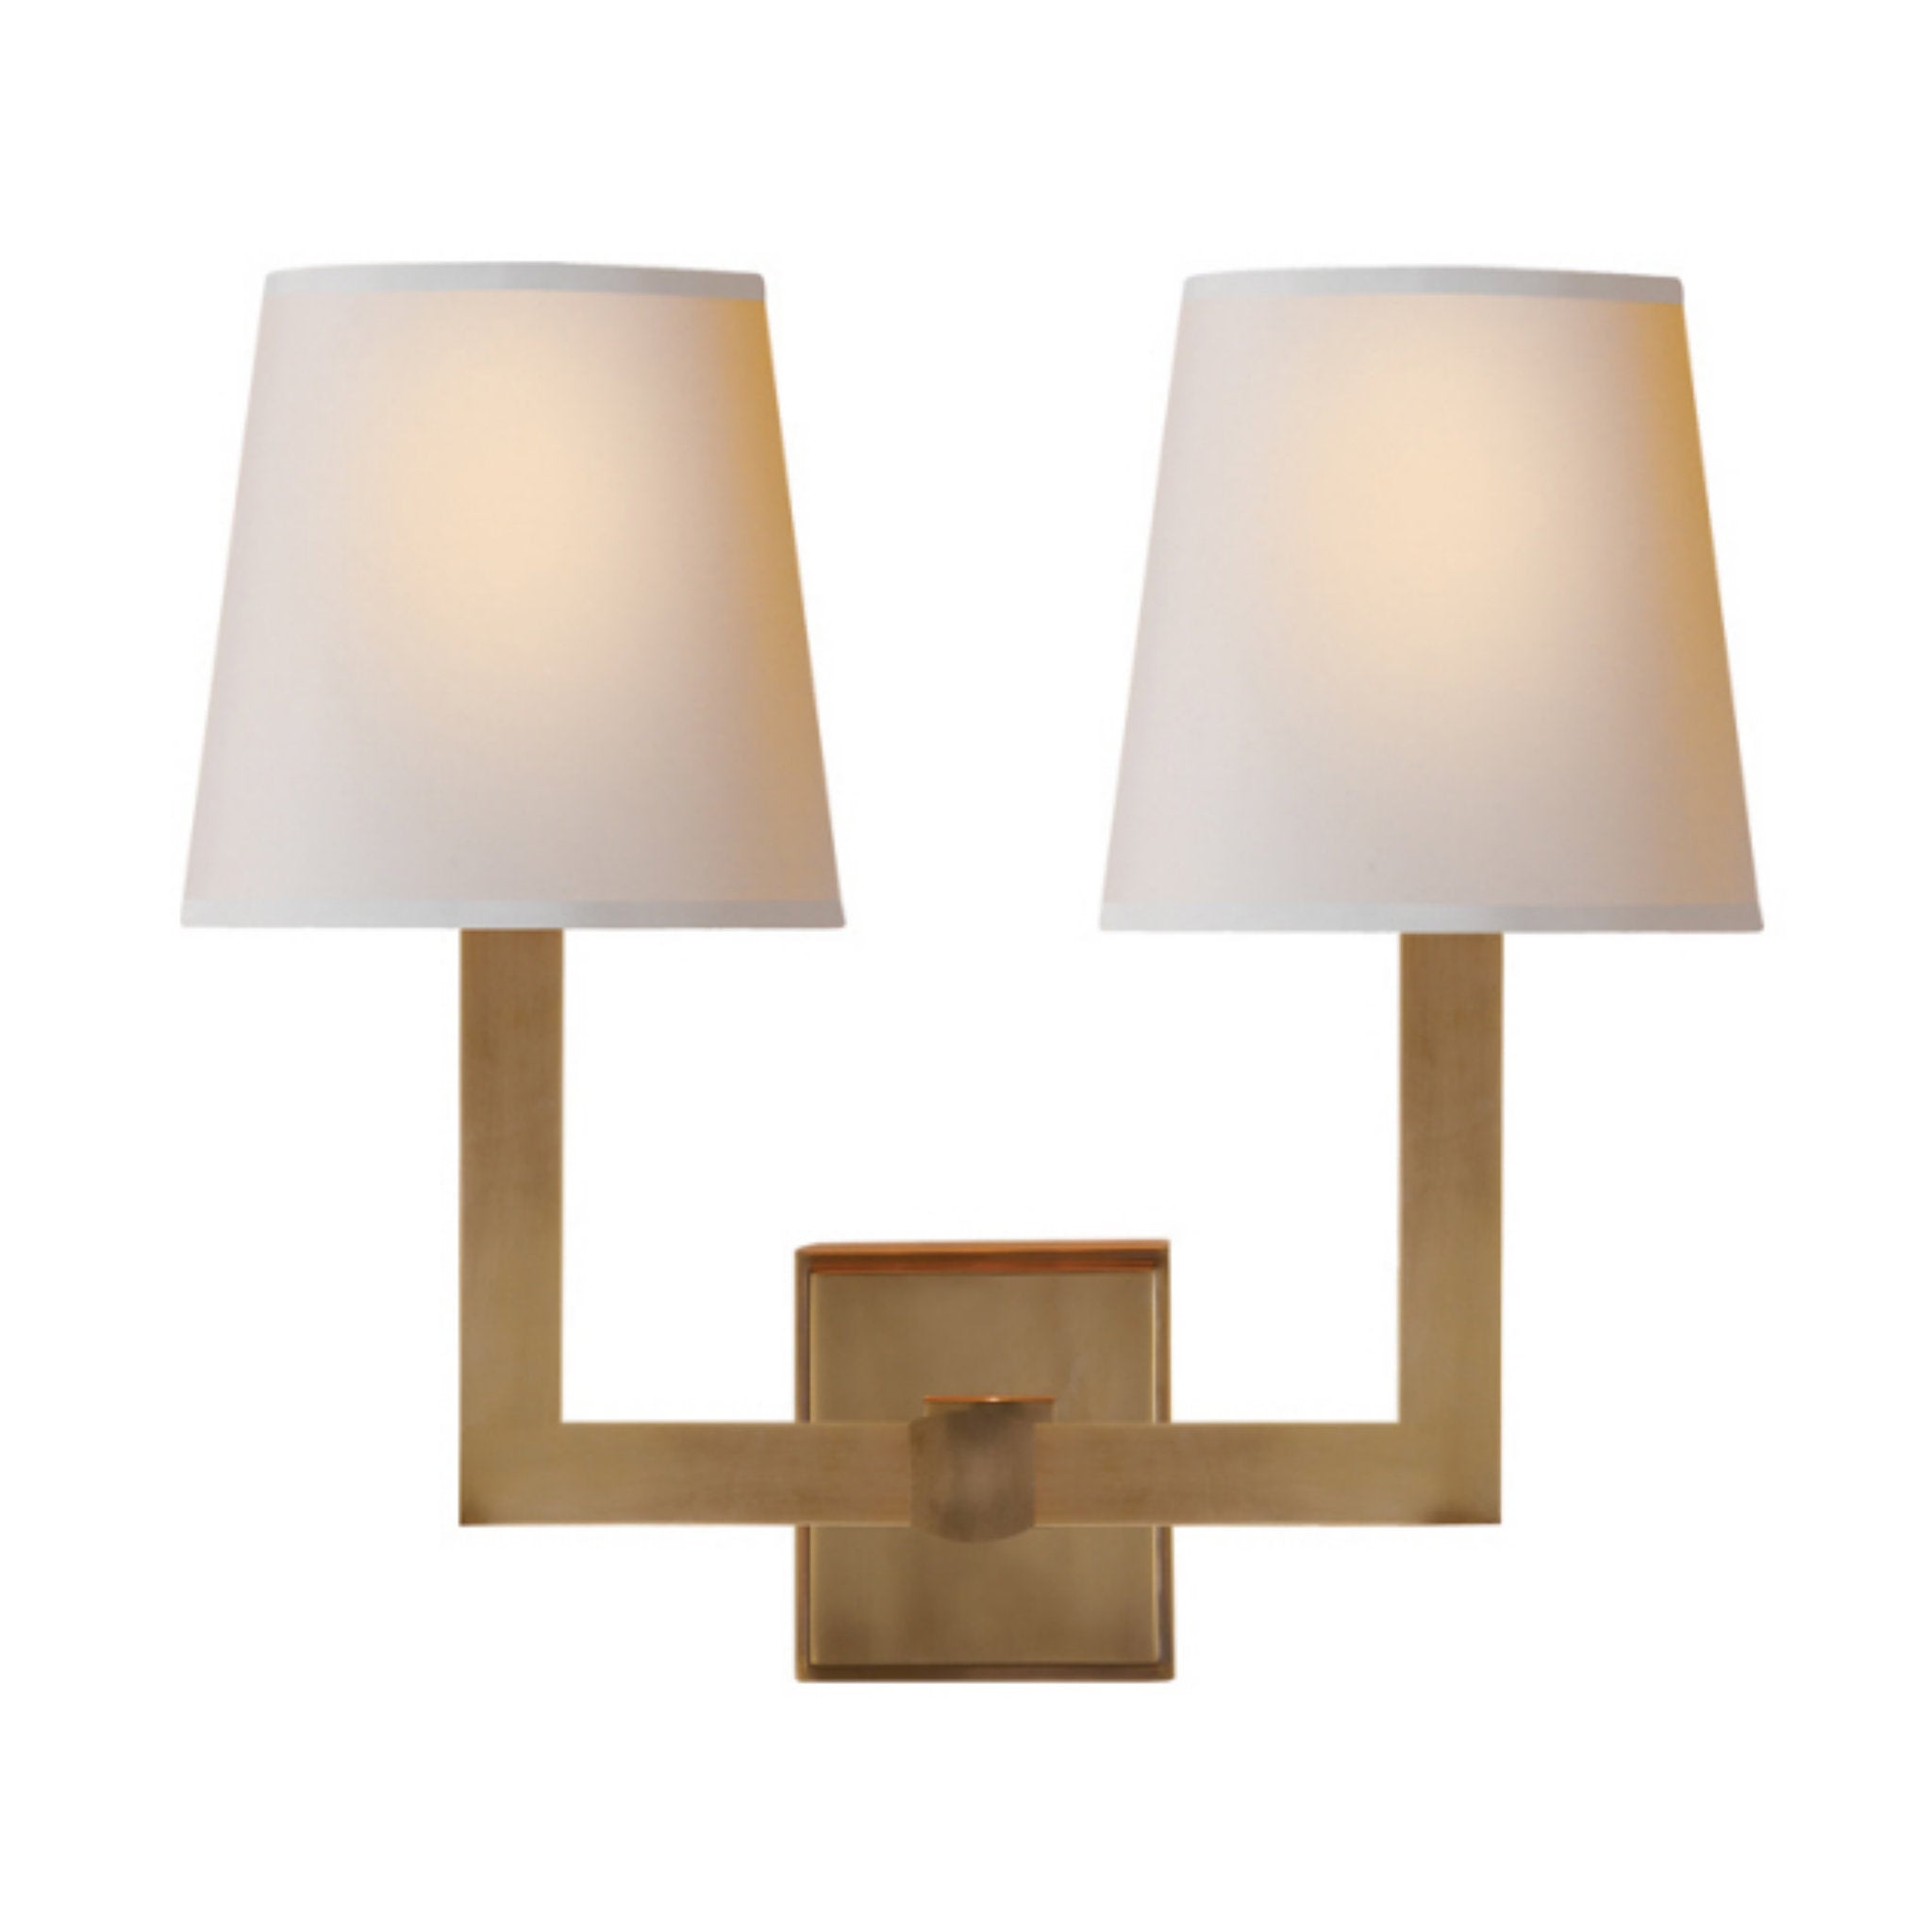 Chapman & Myers Square Tube Double Sconce in Hand-Rubbed Antique Brass with Natural Paper Shades